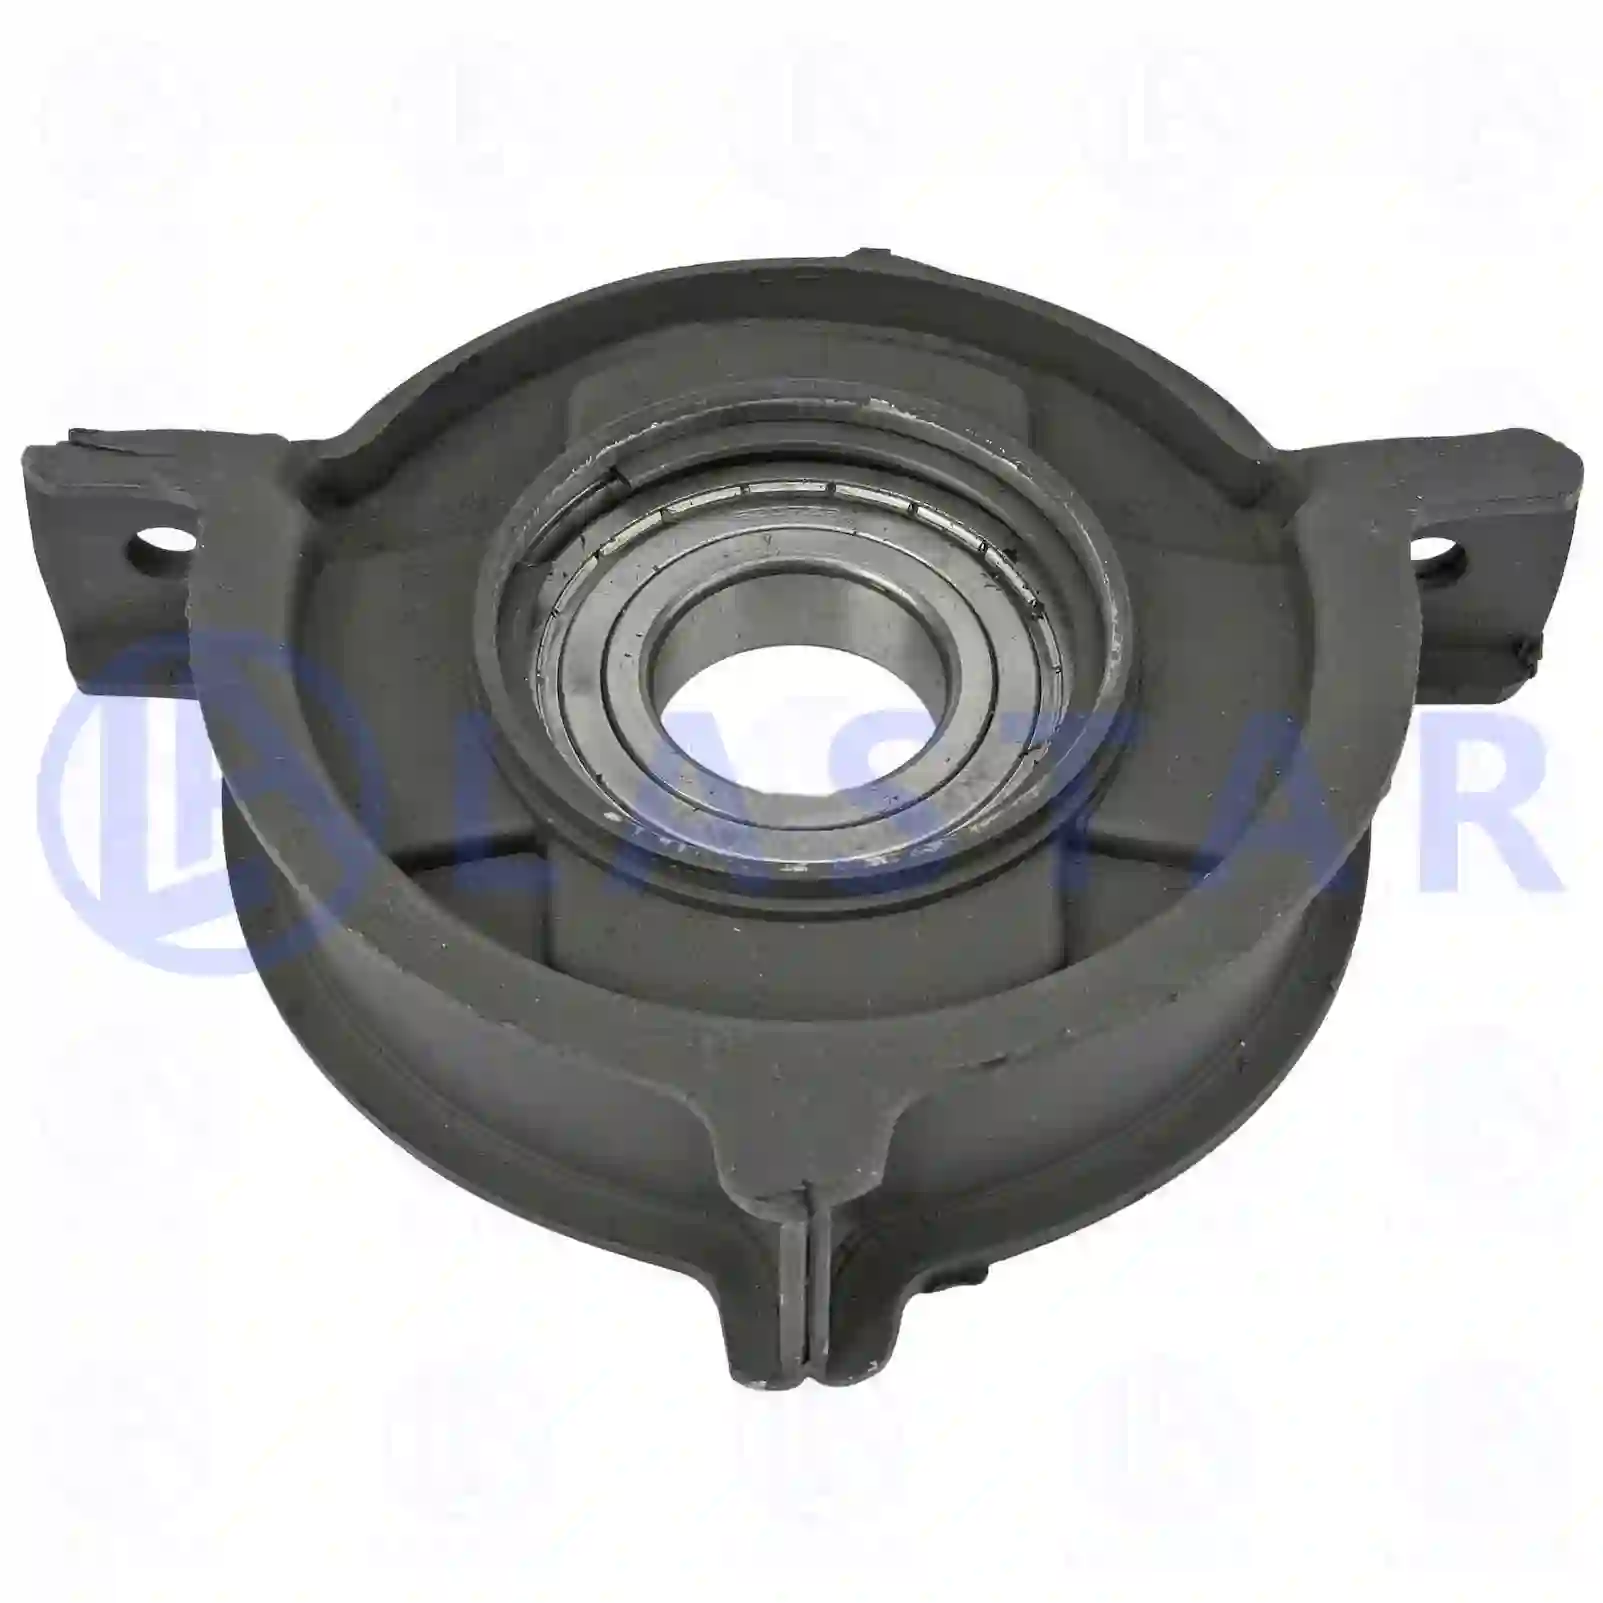 Support Bearing Center bearing, la no: 77734258 ,  oem no:3094100110, 3095860141, 3104100622, 3104100822, 3104100922 Lastar Spare Part | Truck Spare Parts, Auotomotive Spare Parts